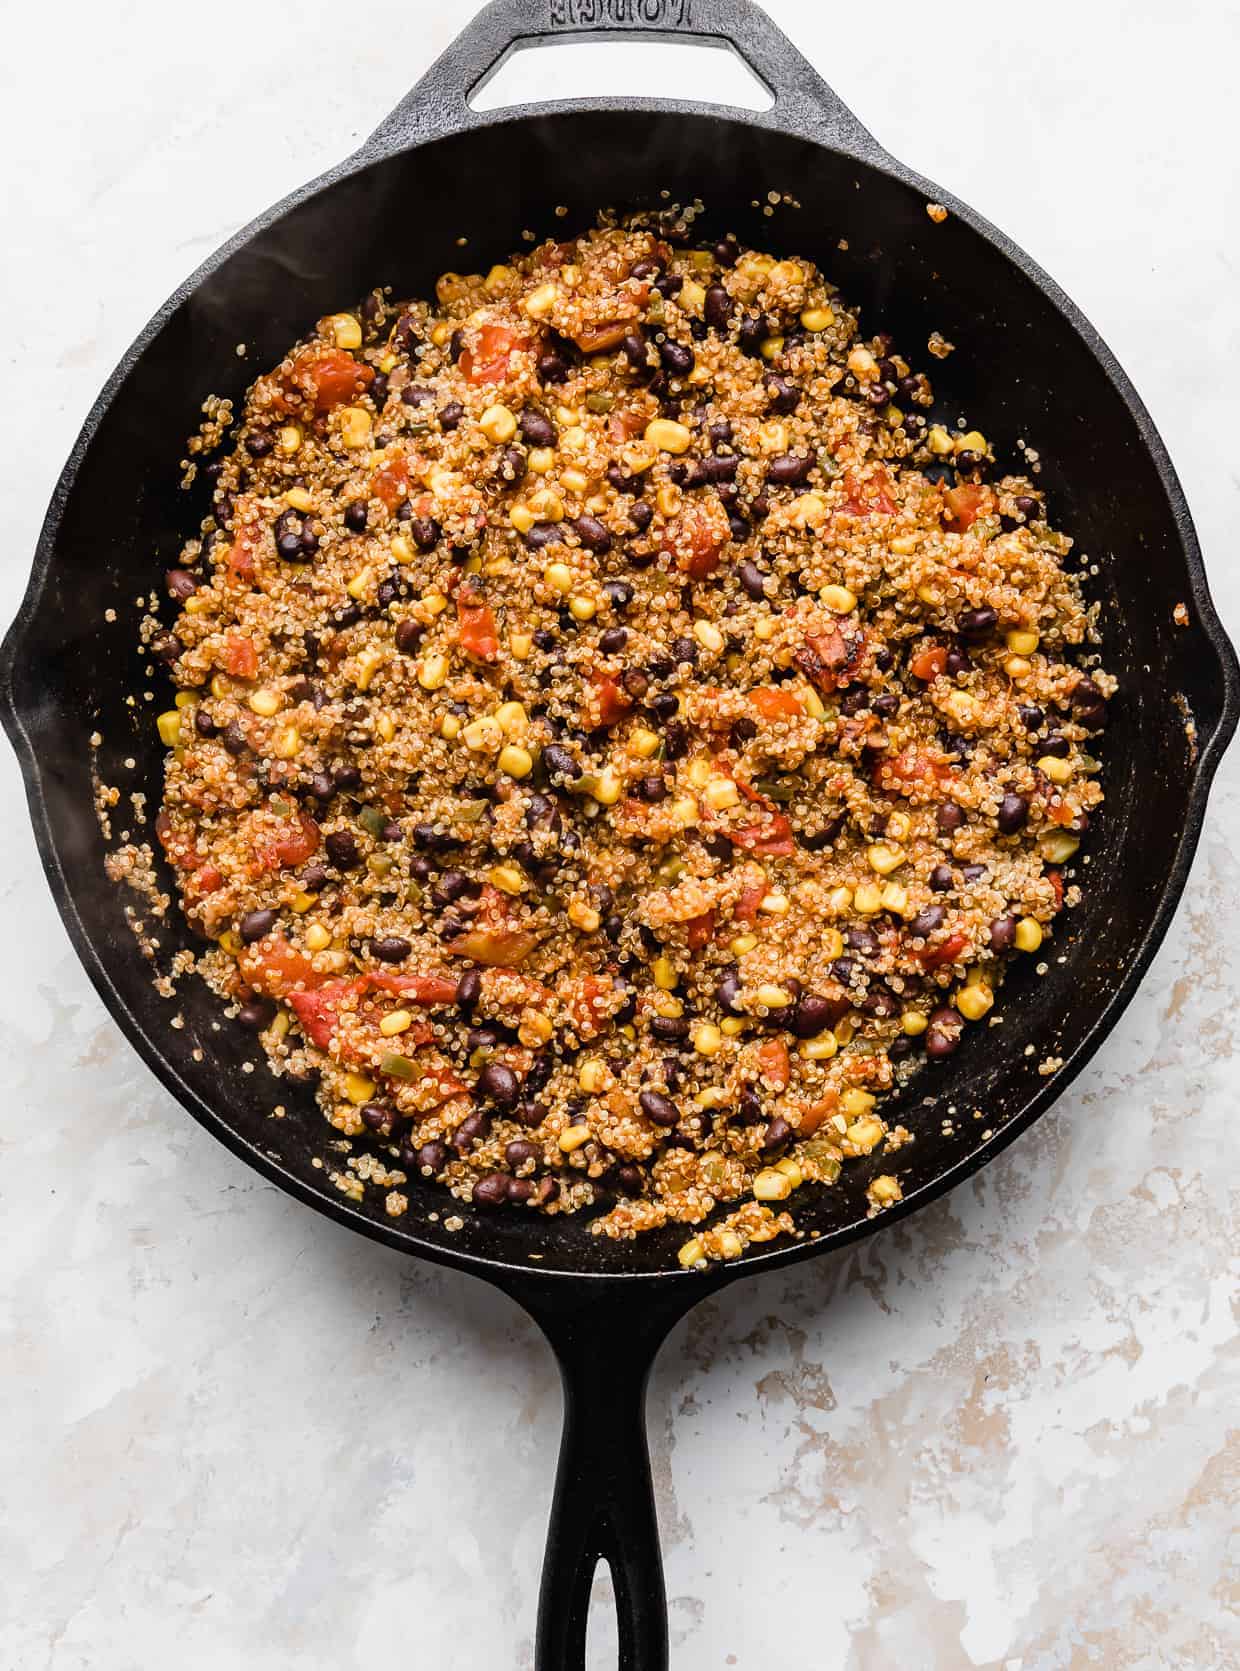 Cooked Mexican quinoa loaded with black beans, tomatoes, and corn, in a black skillet against a white background.